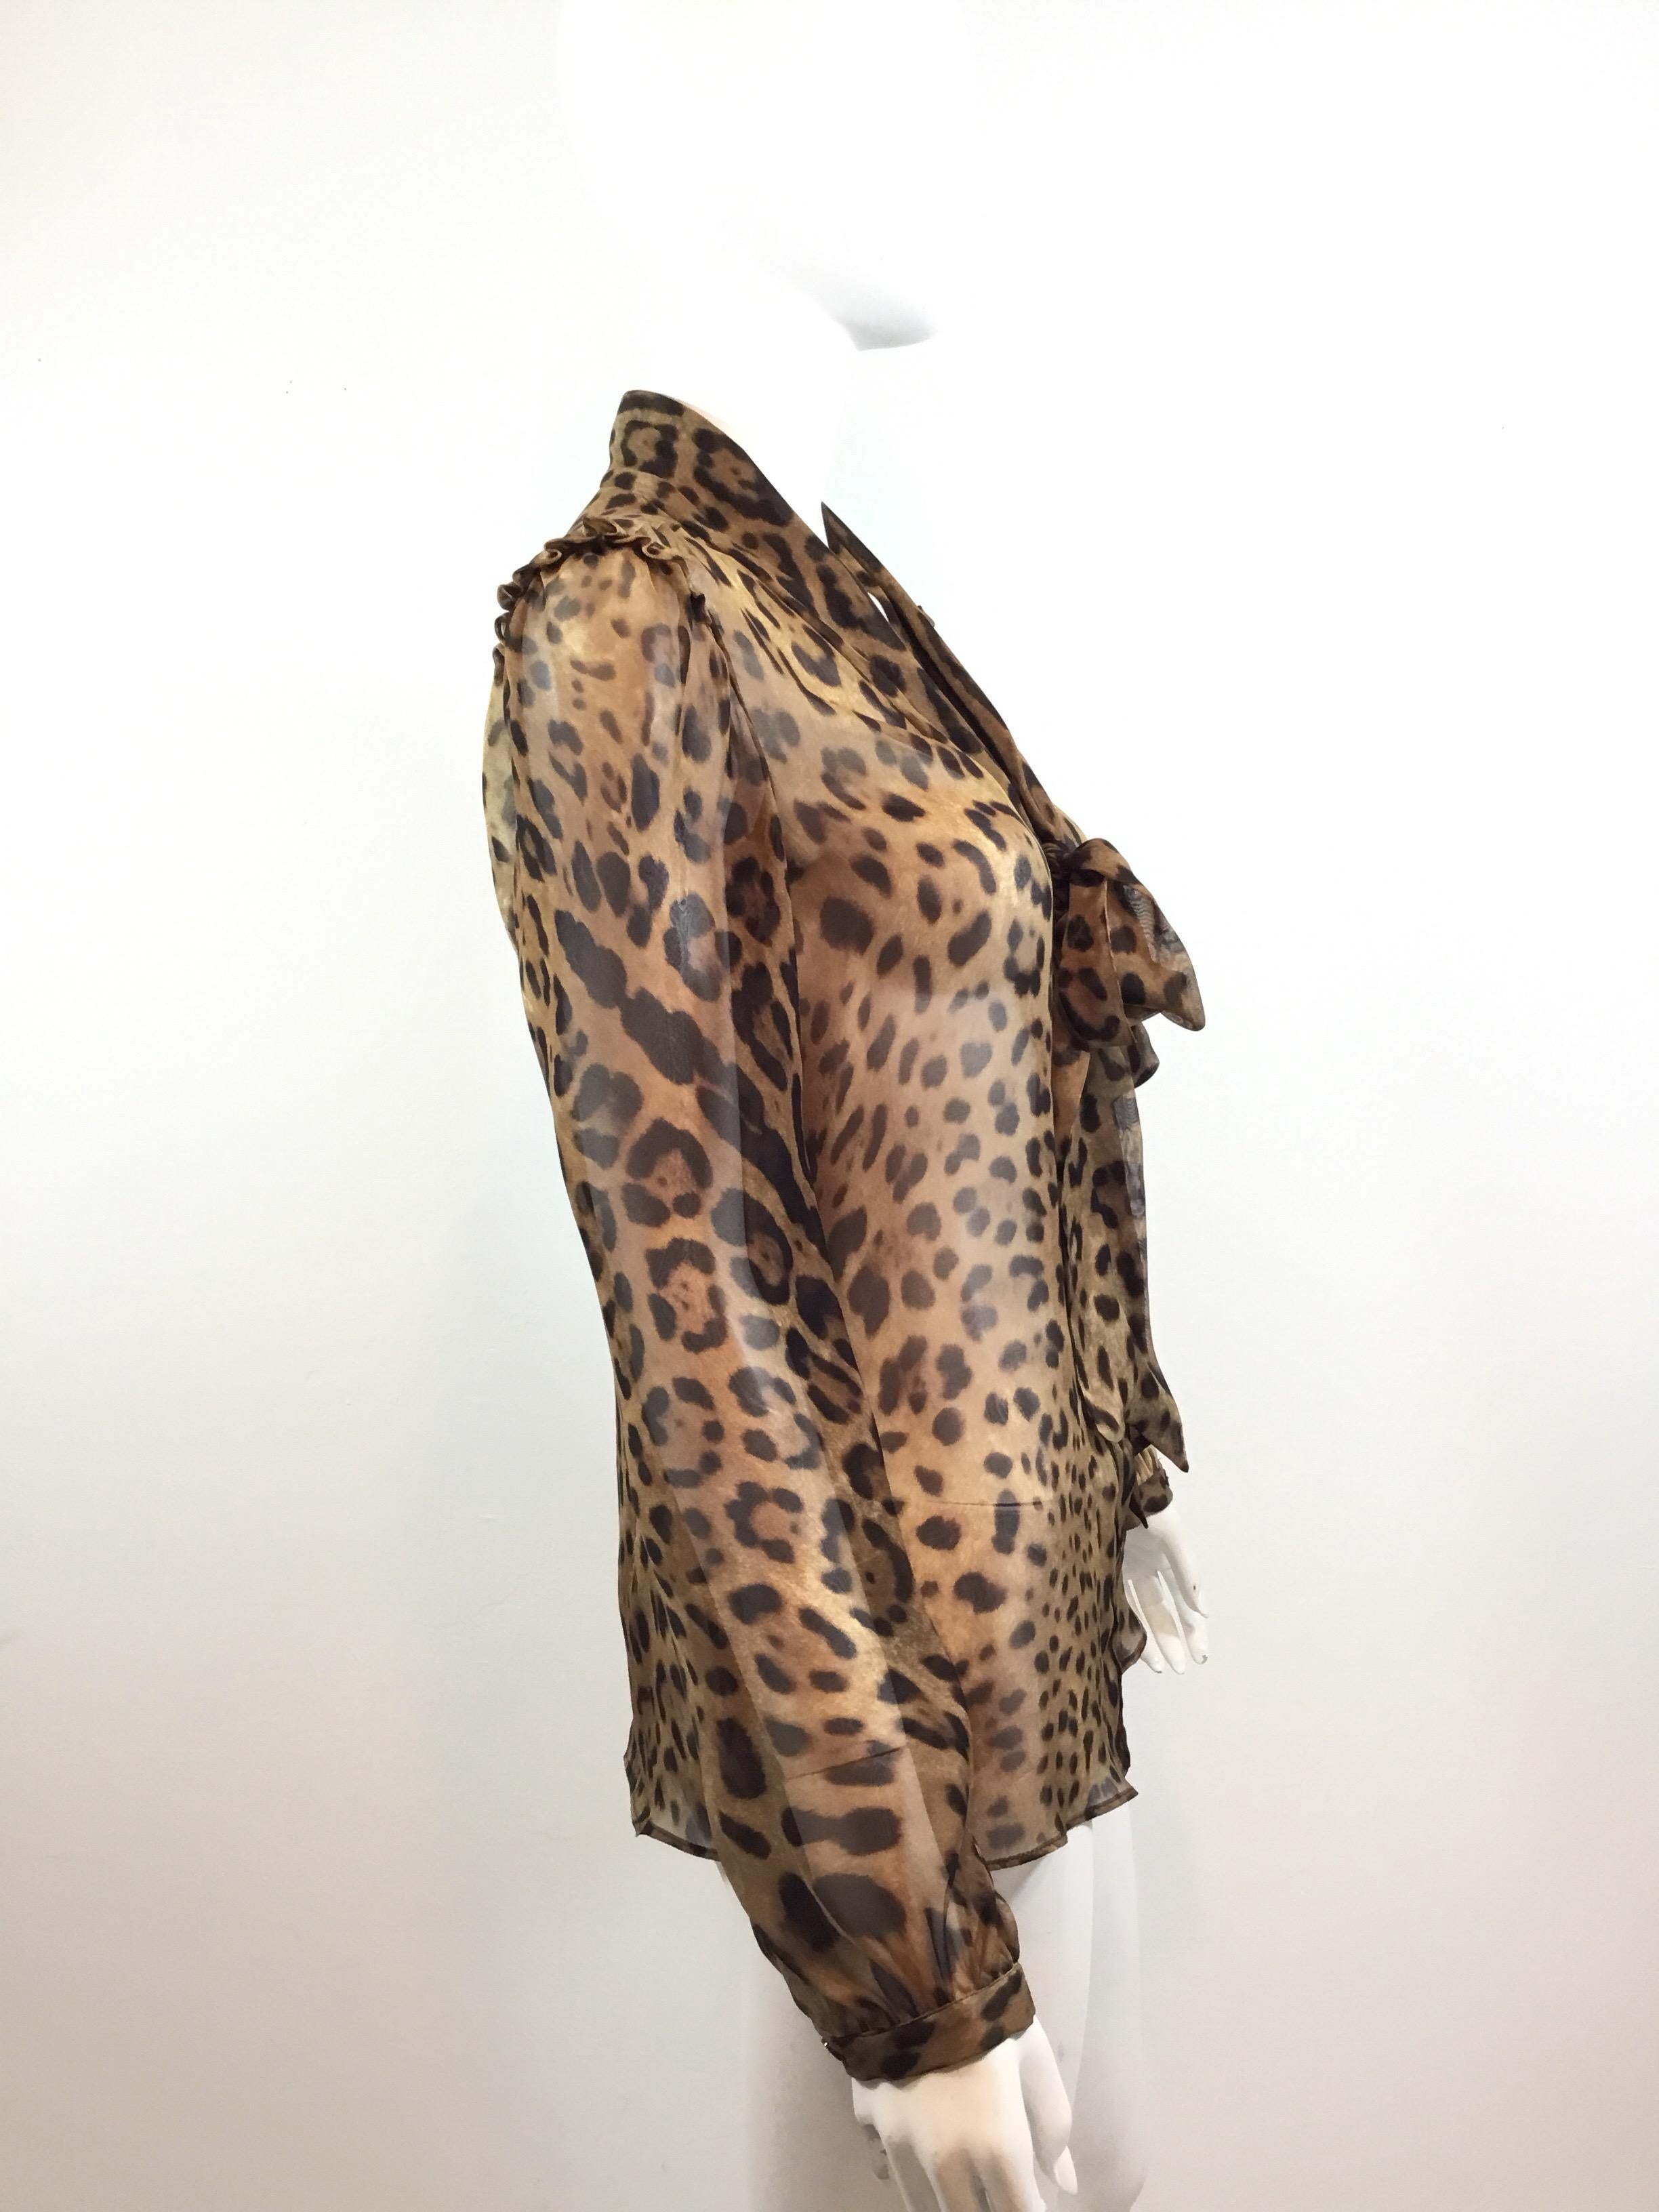 Dolce& Gabbana silk chiffon blouse with a leopard print throughout, button fastenings and a neck tie. Blouse is a size 42, made in Italy.

Bust 36”, sleeves 28”, length 26”